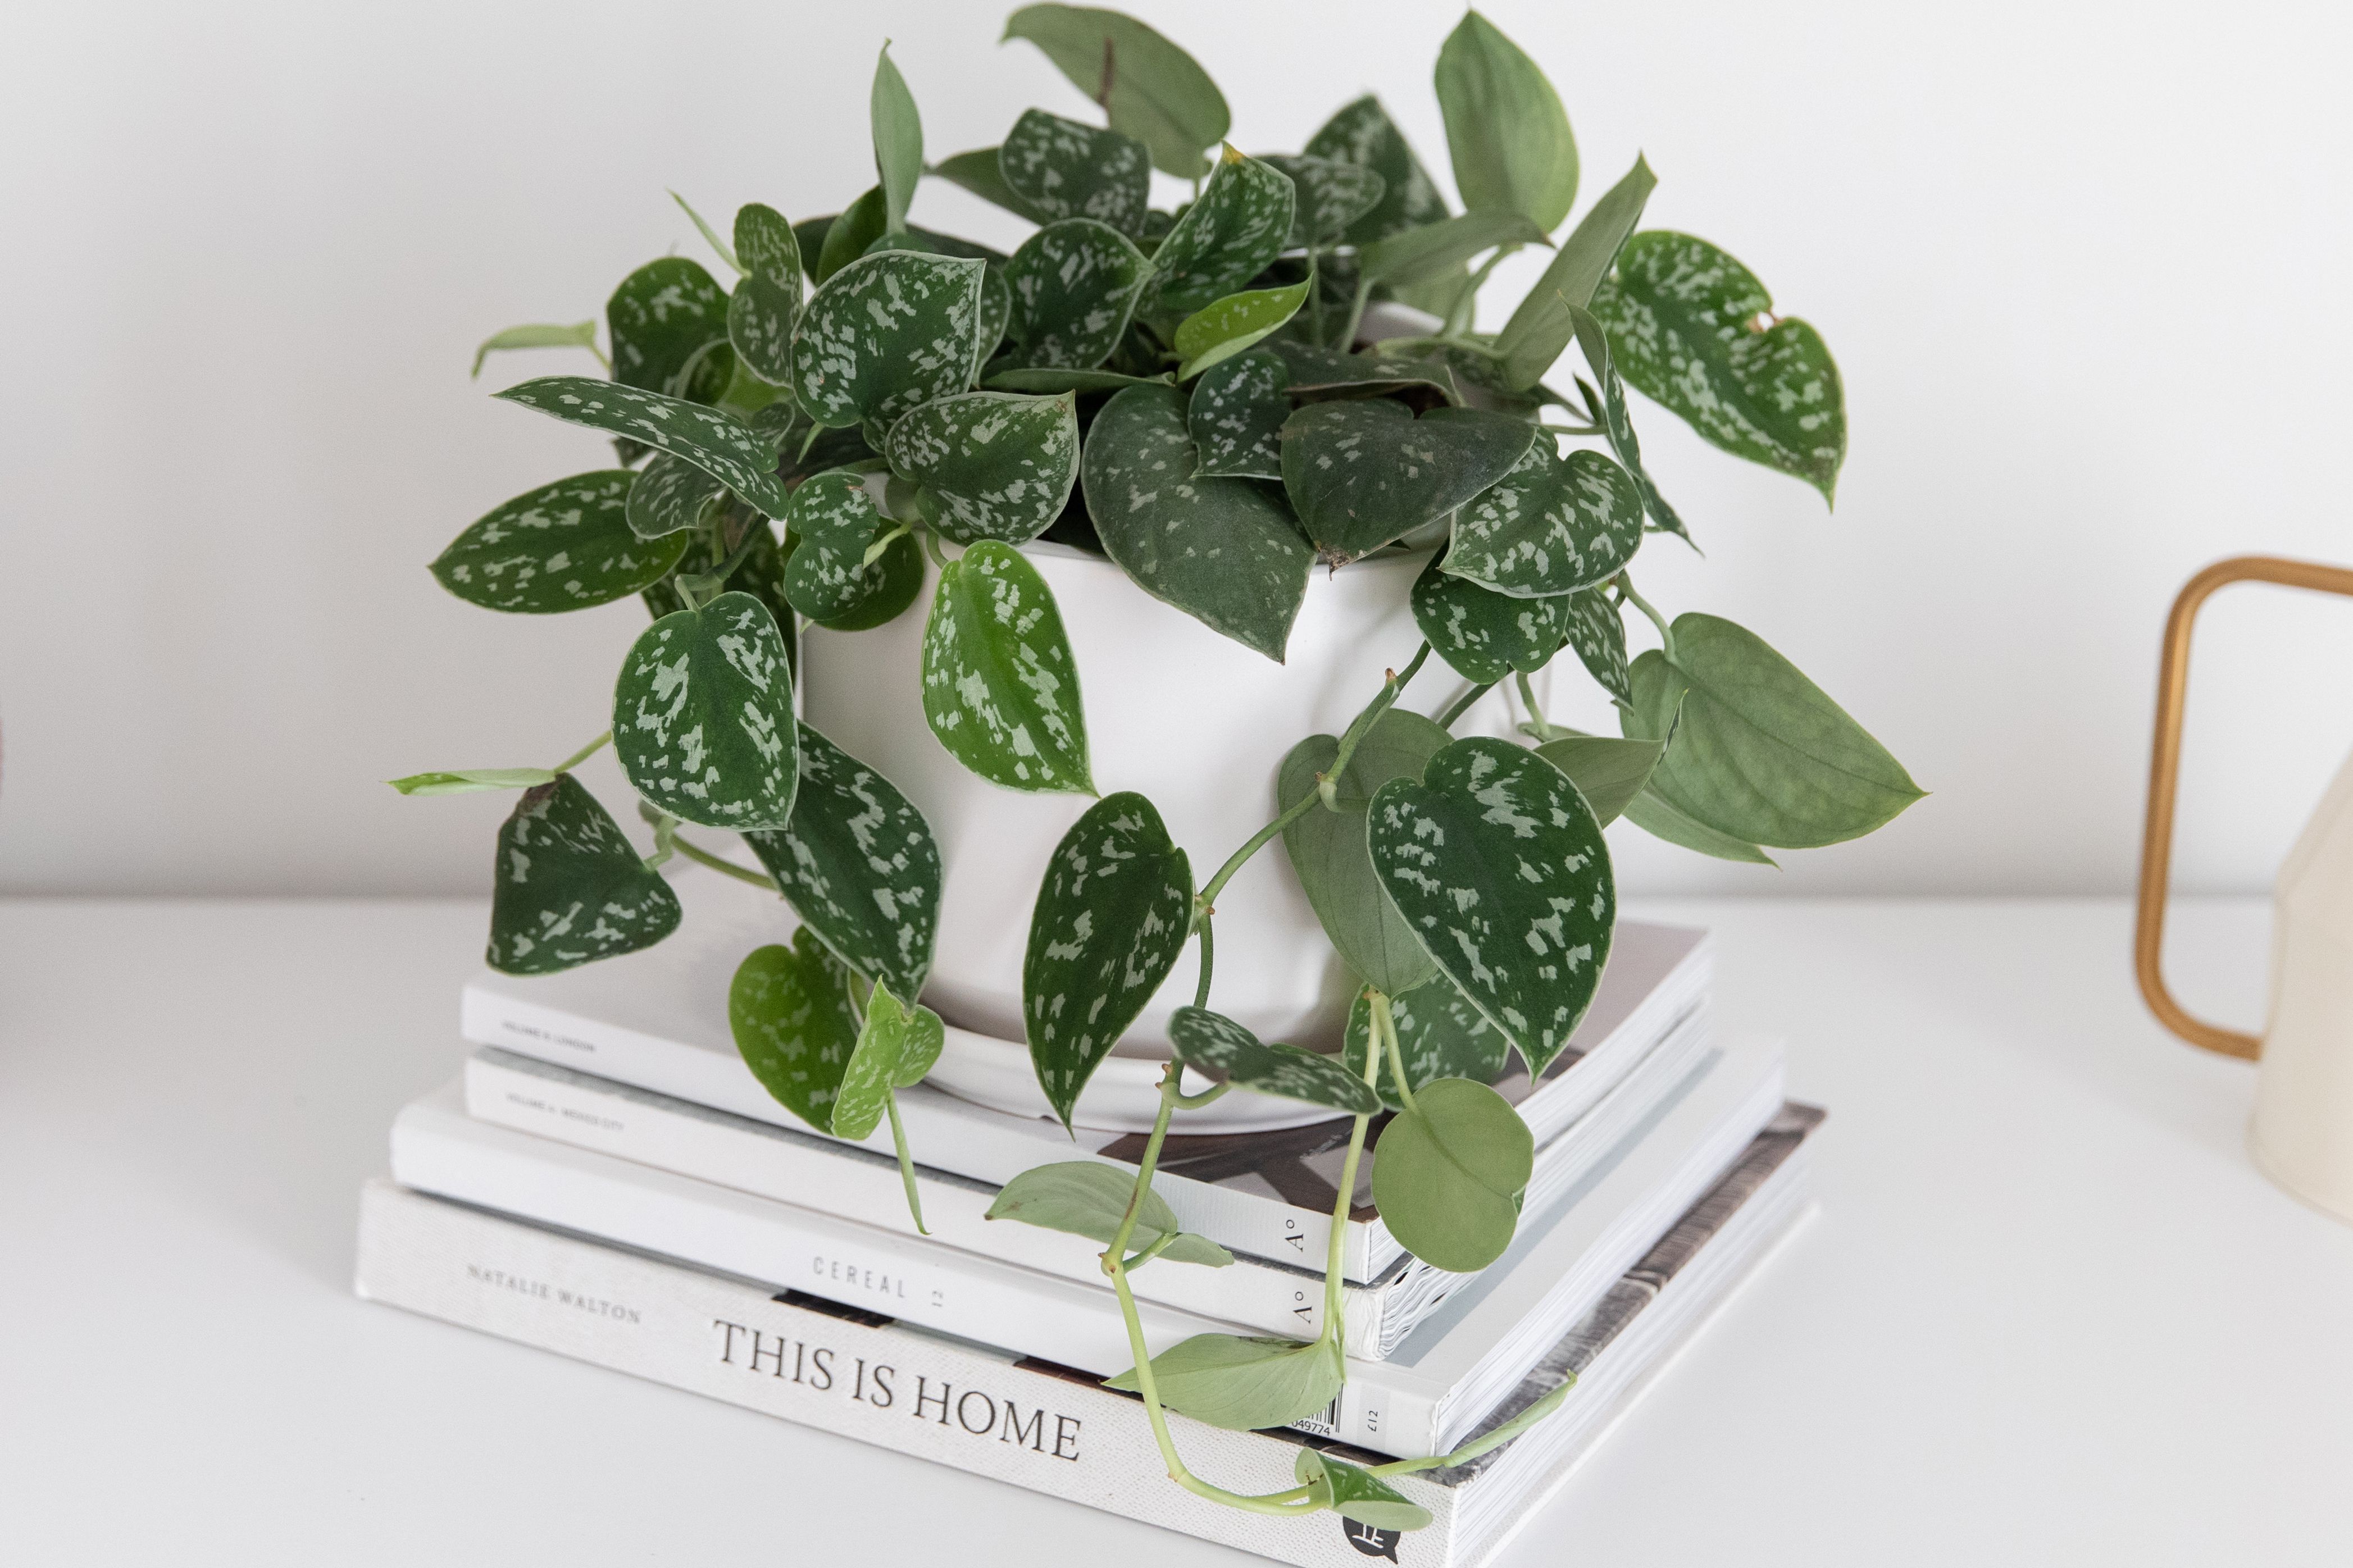 A Pretty Vine Thats One of the Easiest Houseplants to Grow